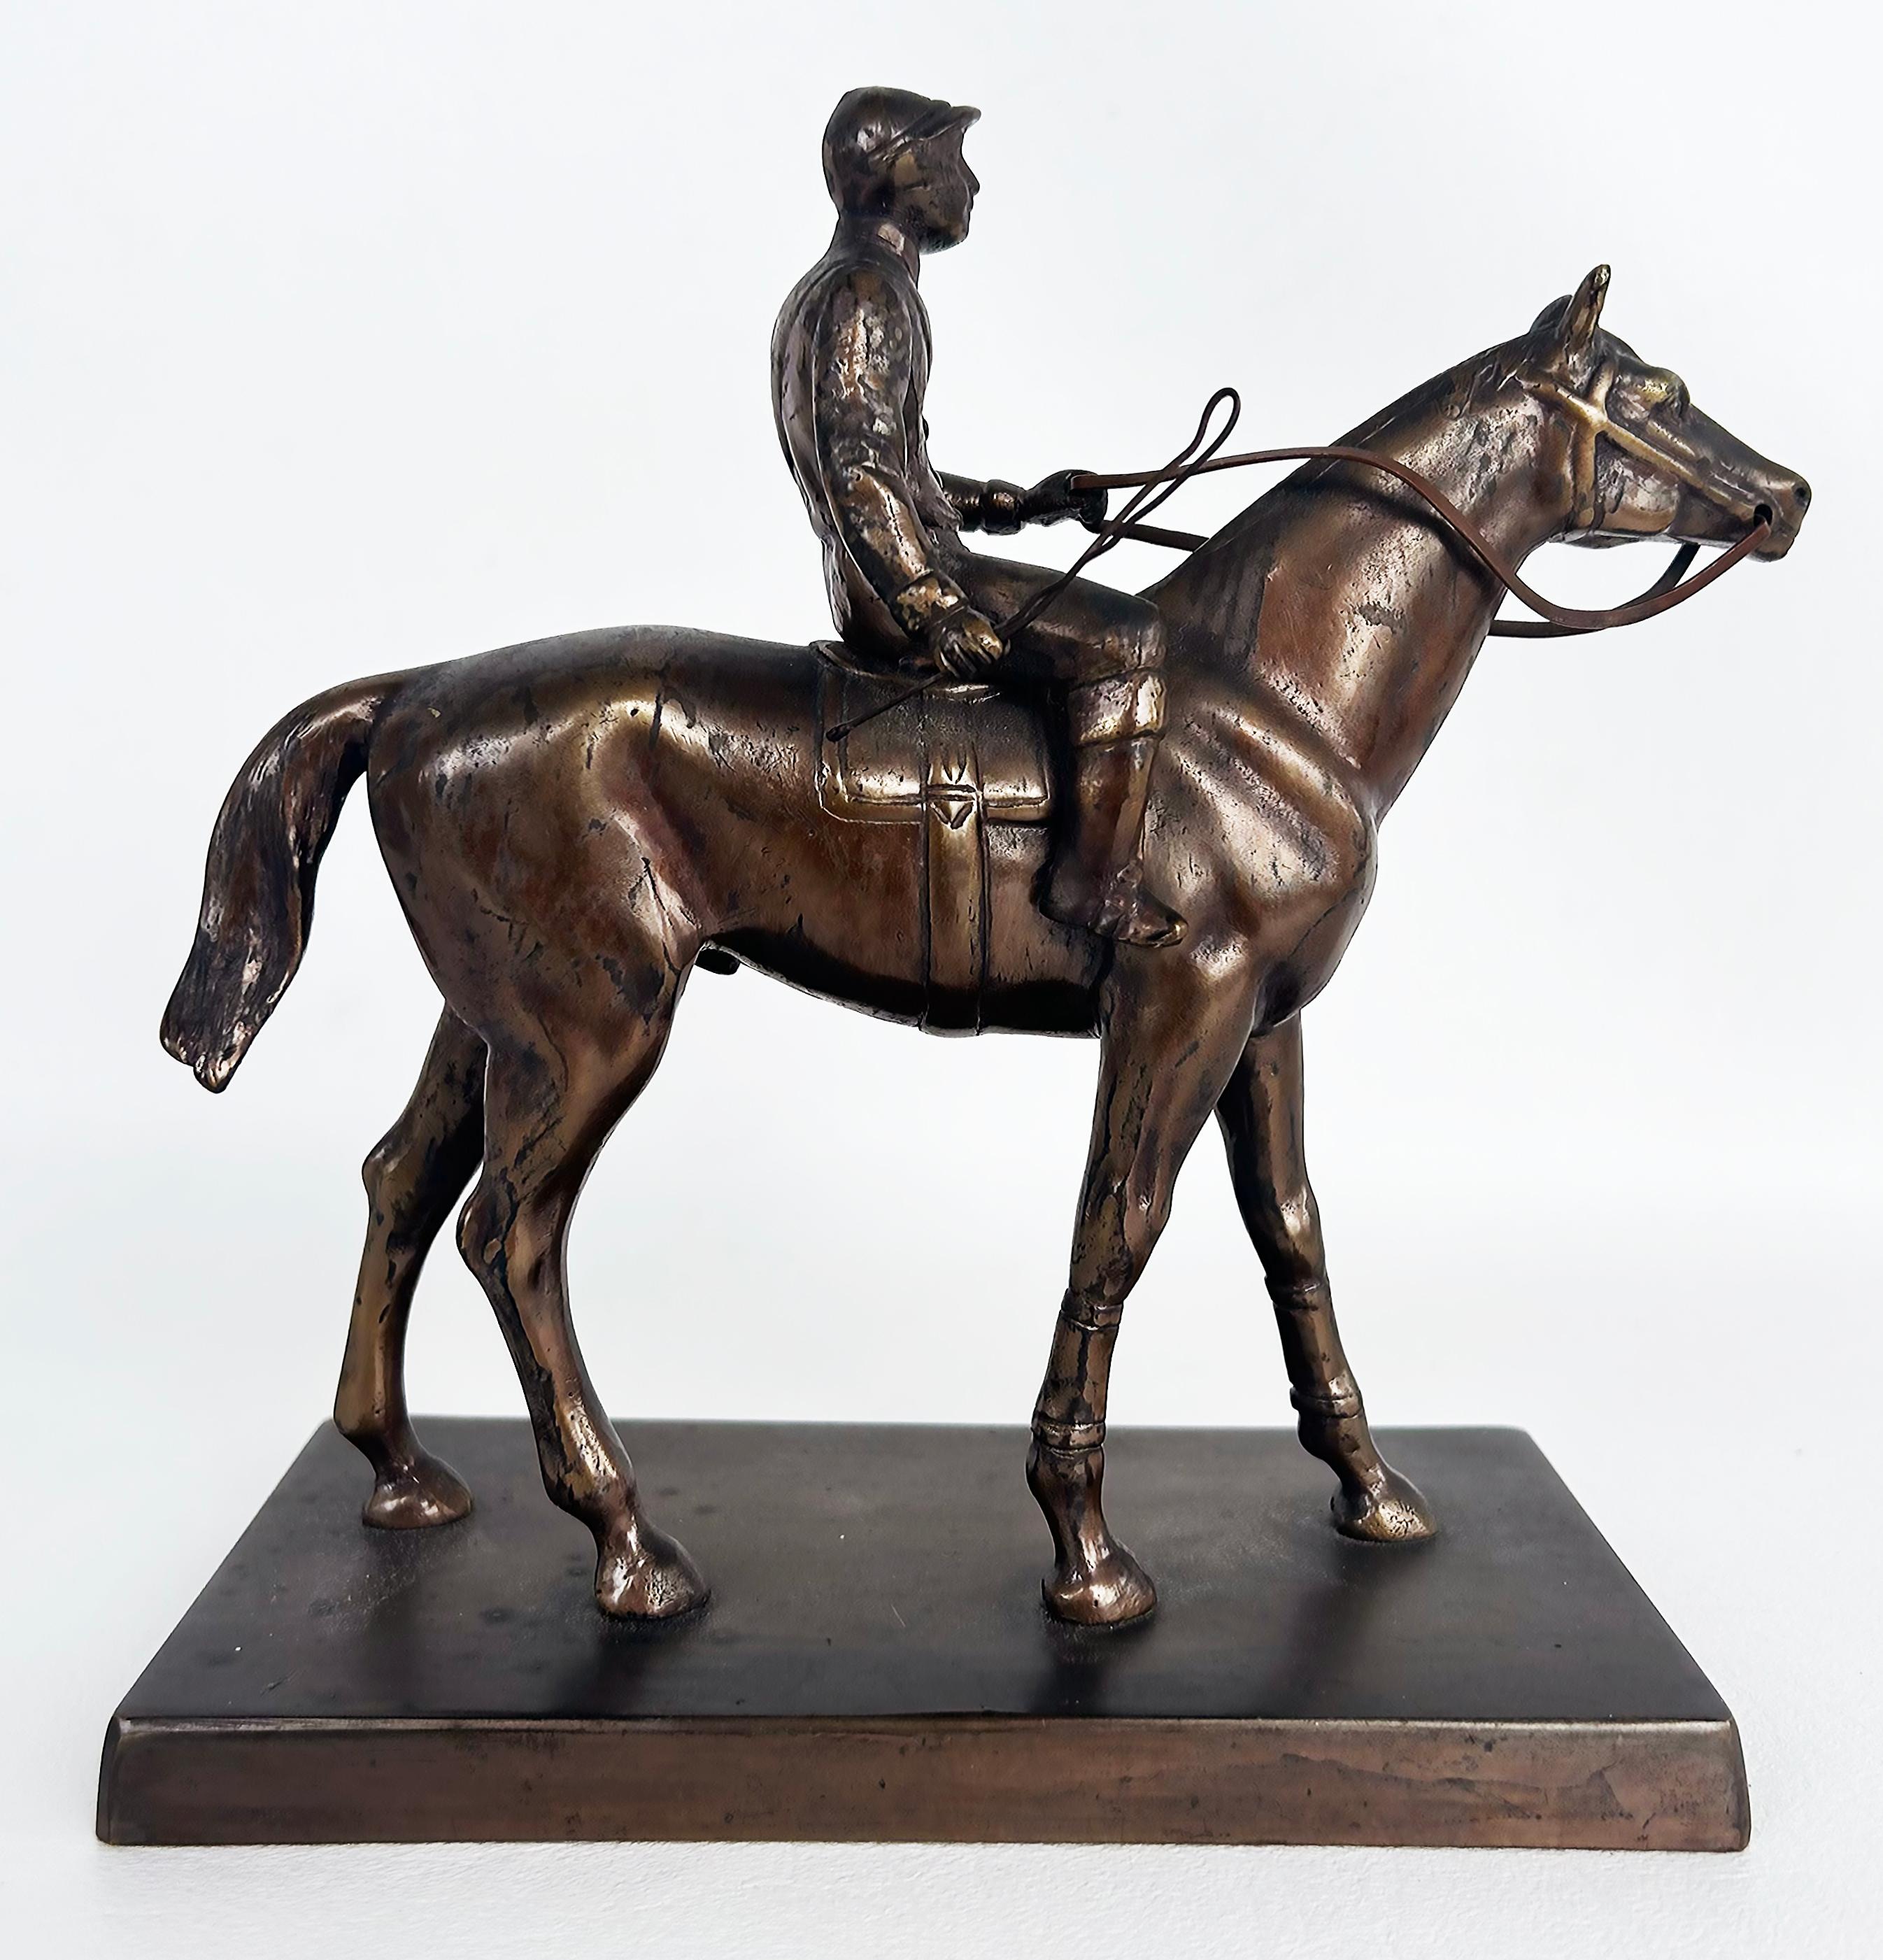 Equestrian Bronze Figurative Racehorse and Jockey Sculpture Statue

Offered for sale is an equestrian bronze figurative sculpture of a thoroughbred horse and jockey.  This is a well-made 20th-century sculpture but we have not found a signature.